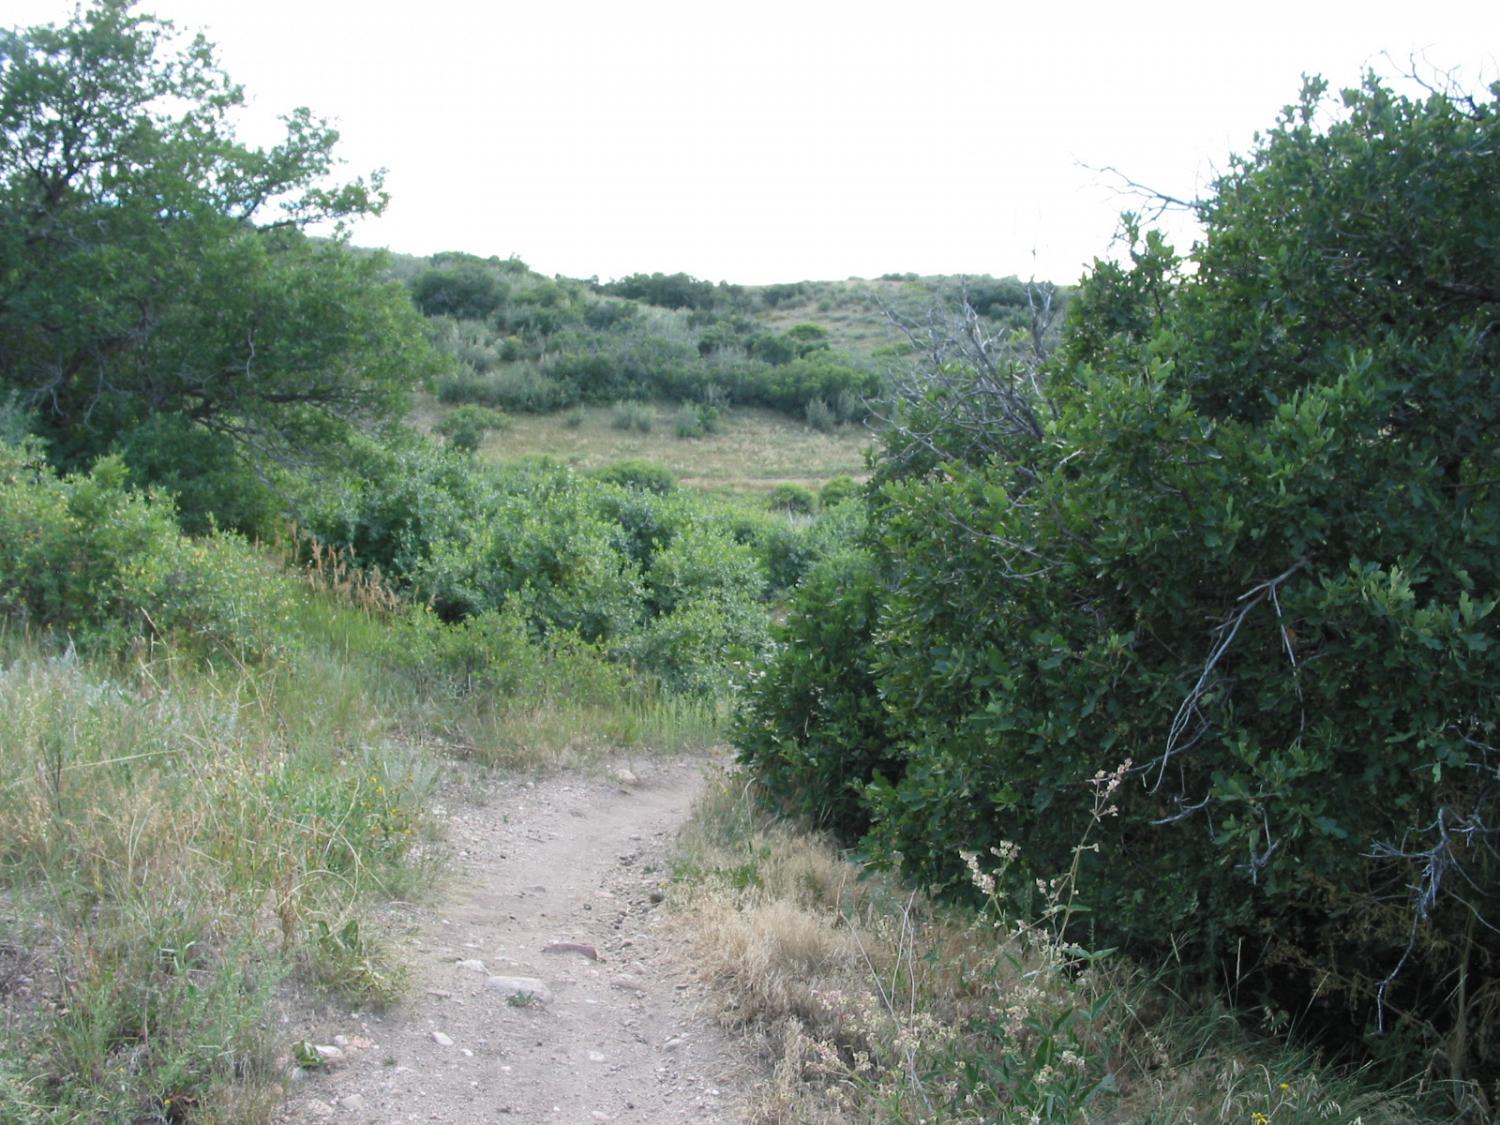 Looking south on the Rocky Gulch Trail in August 2010